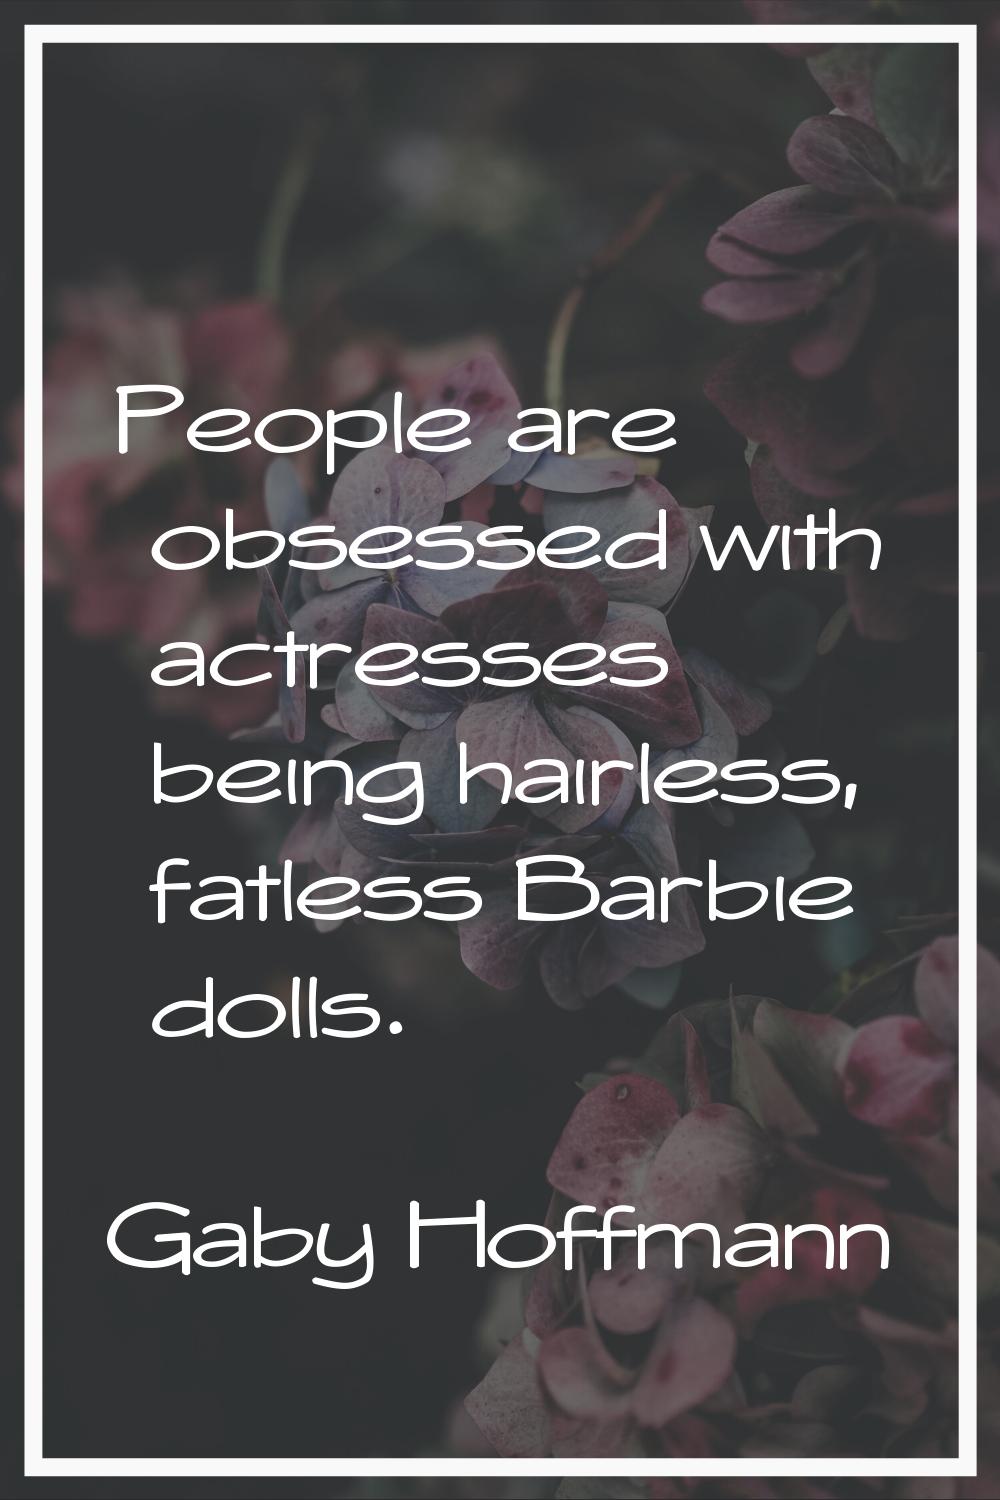 People are obsessed with actresses being hairless, fatless Barbie dolls.